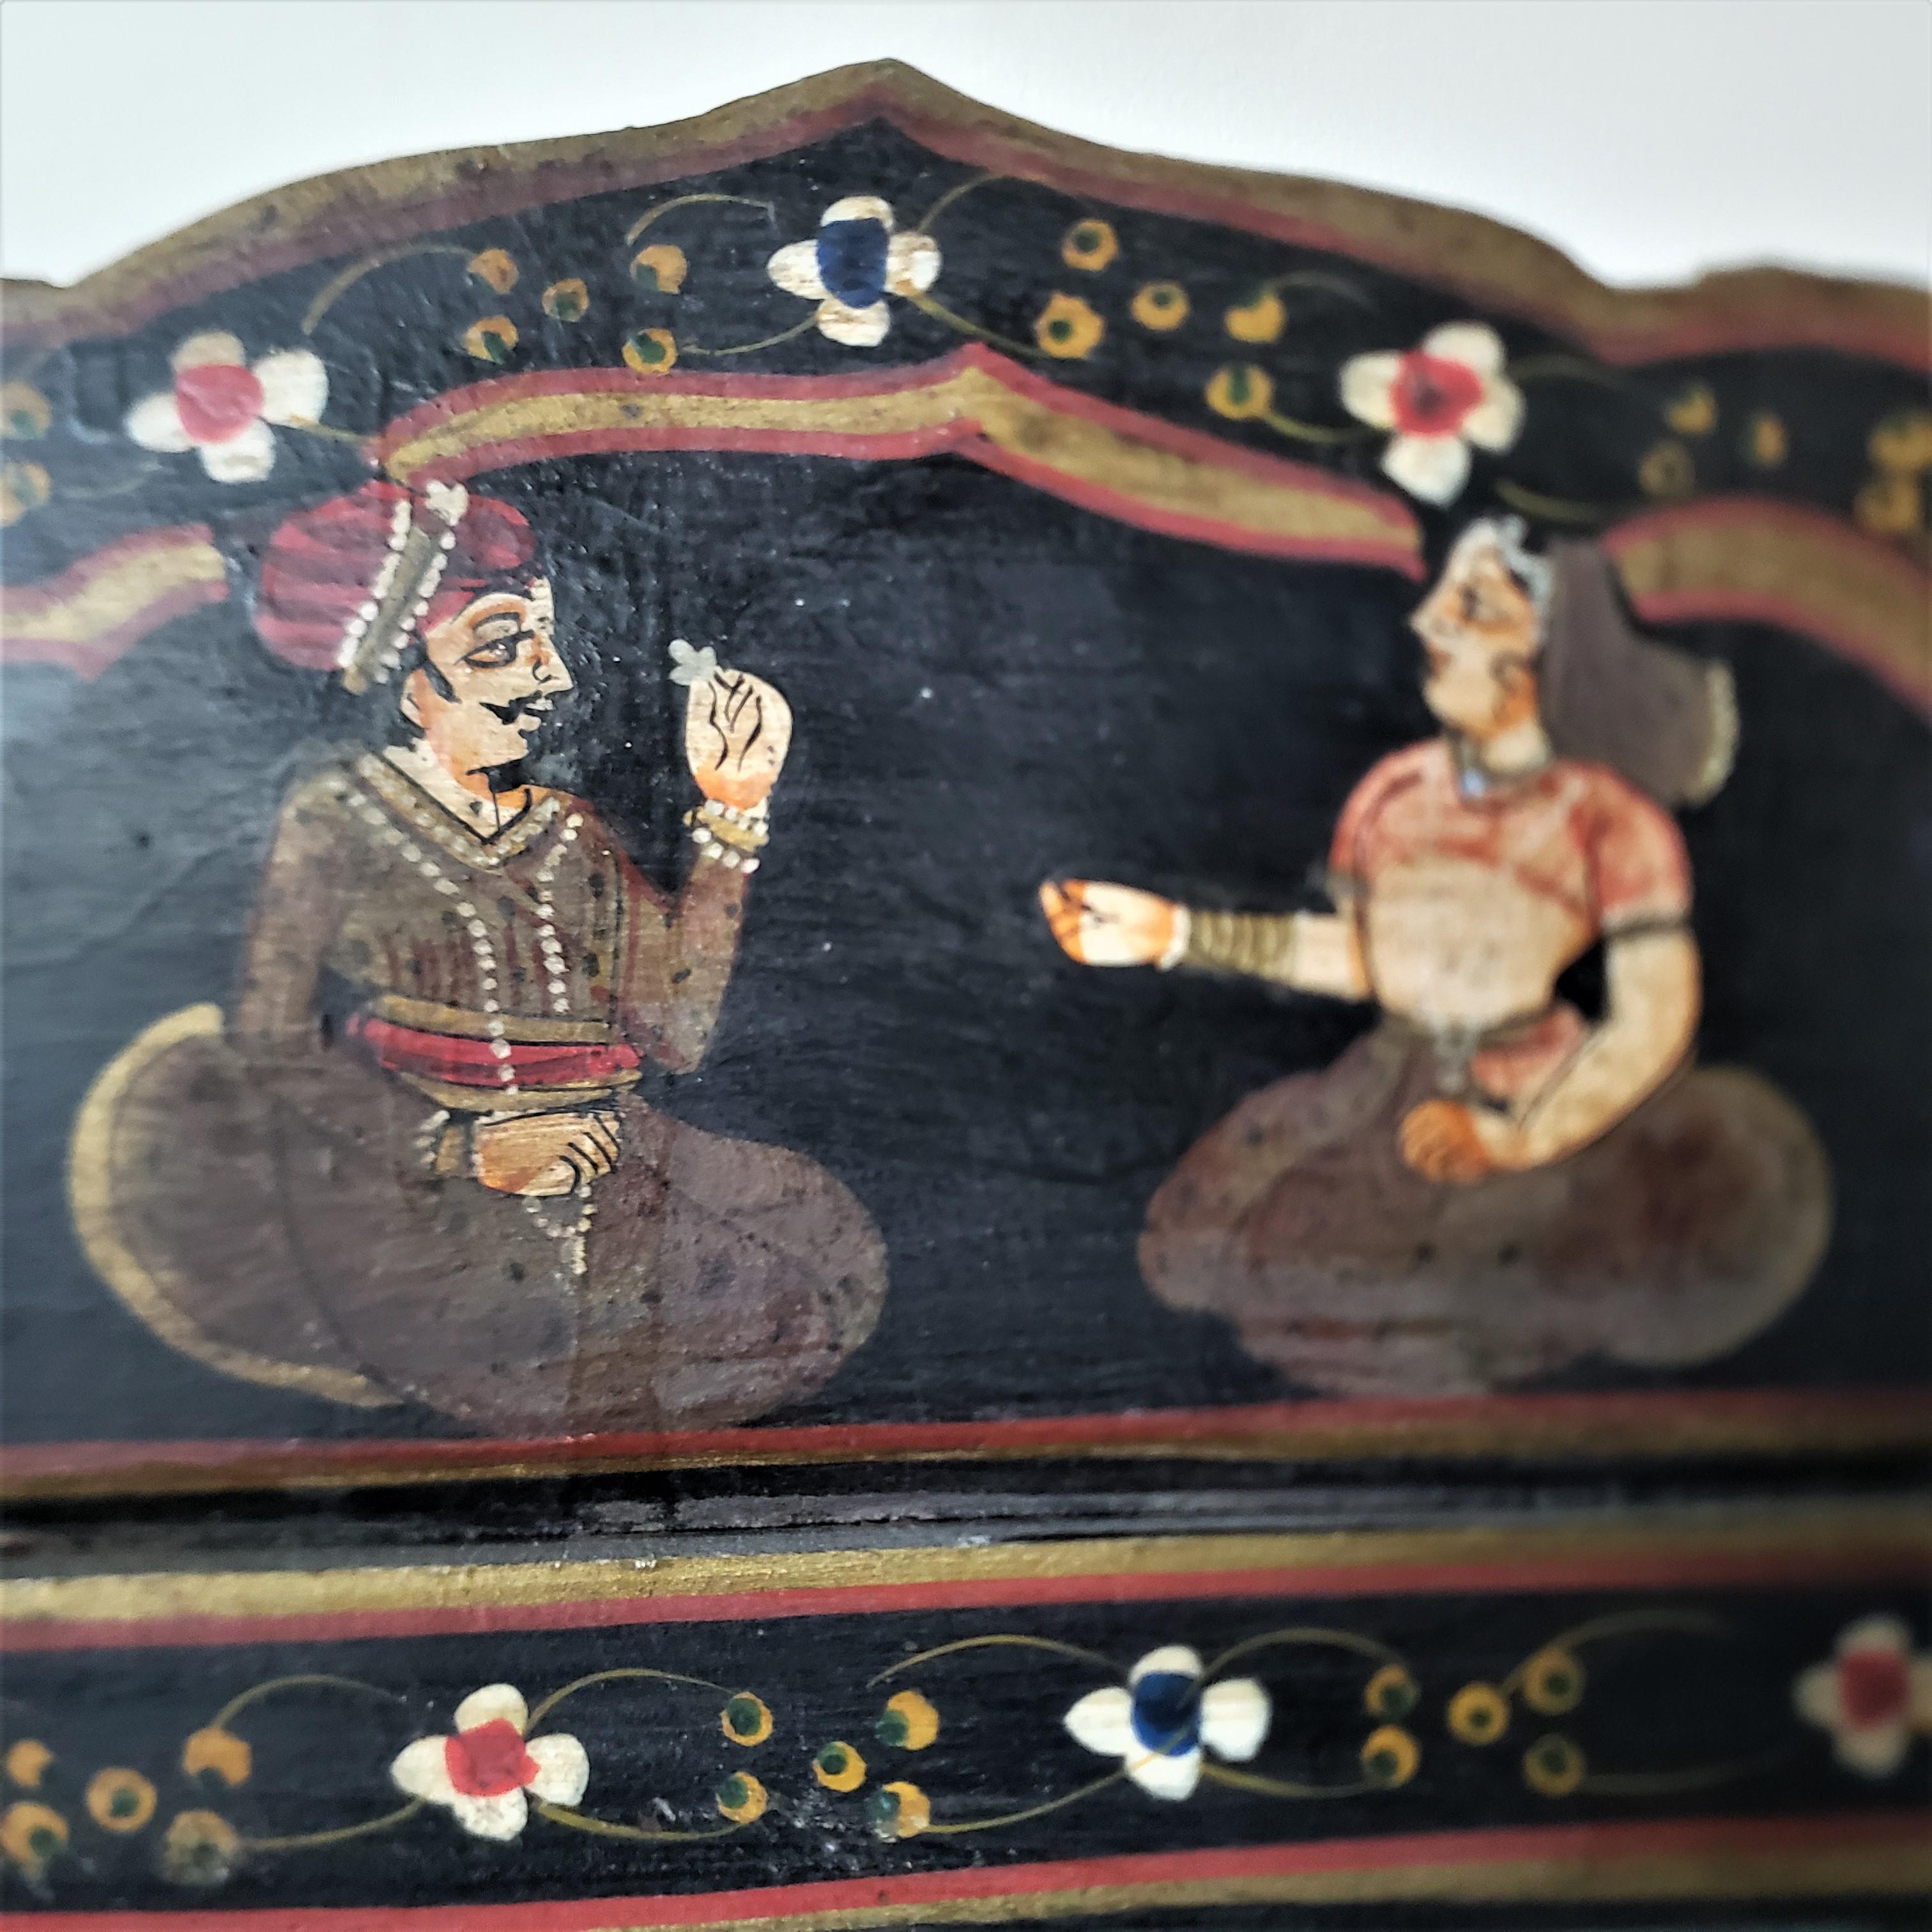 Antique Anglo-Indian Hand-Painted Wooden Four Panel Screen or Room Divider In Good Condition For Sale In Hamilton, Ontario